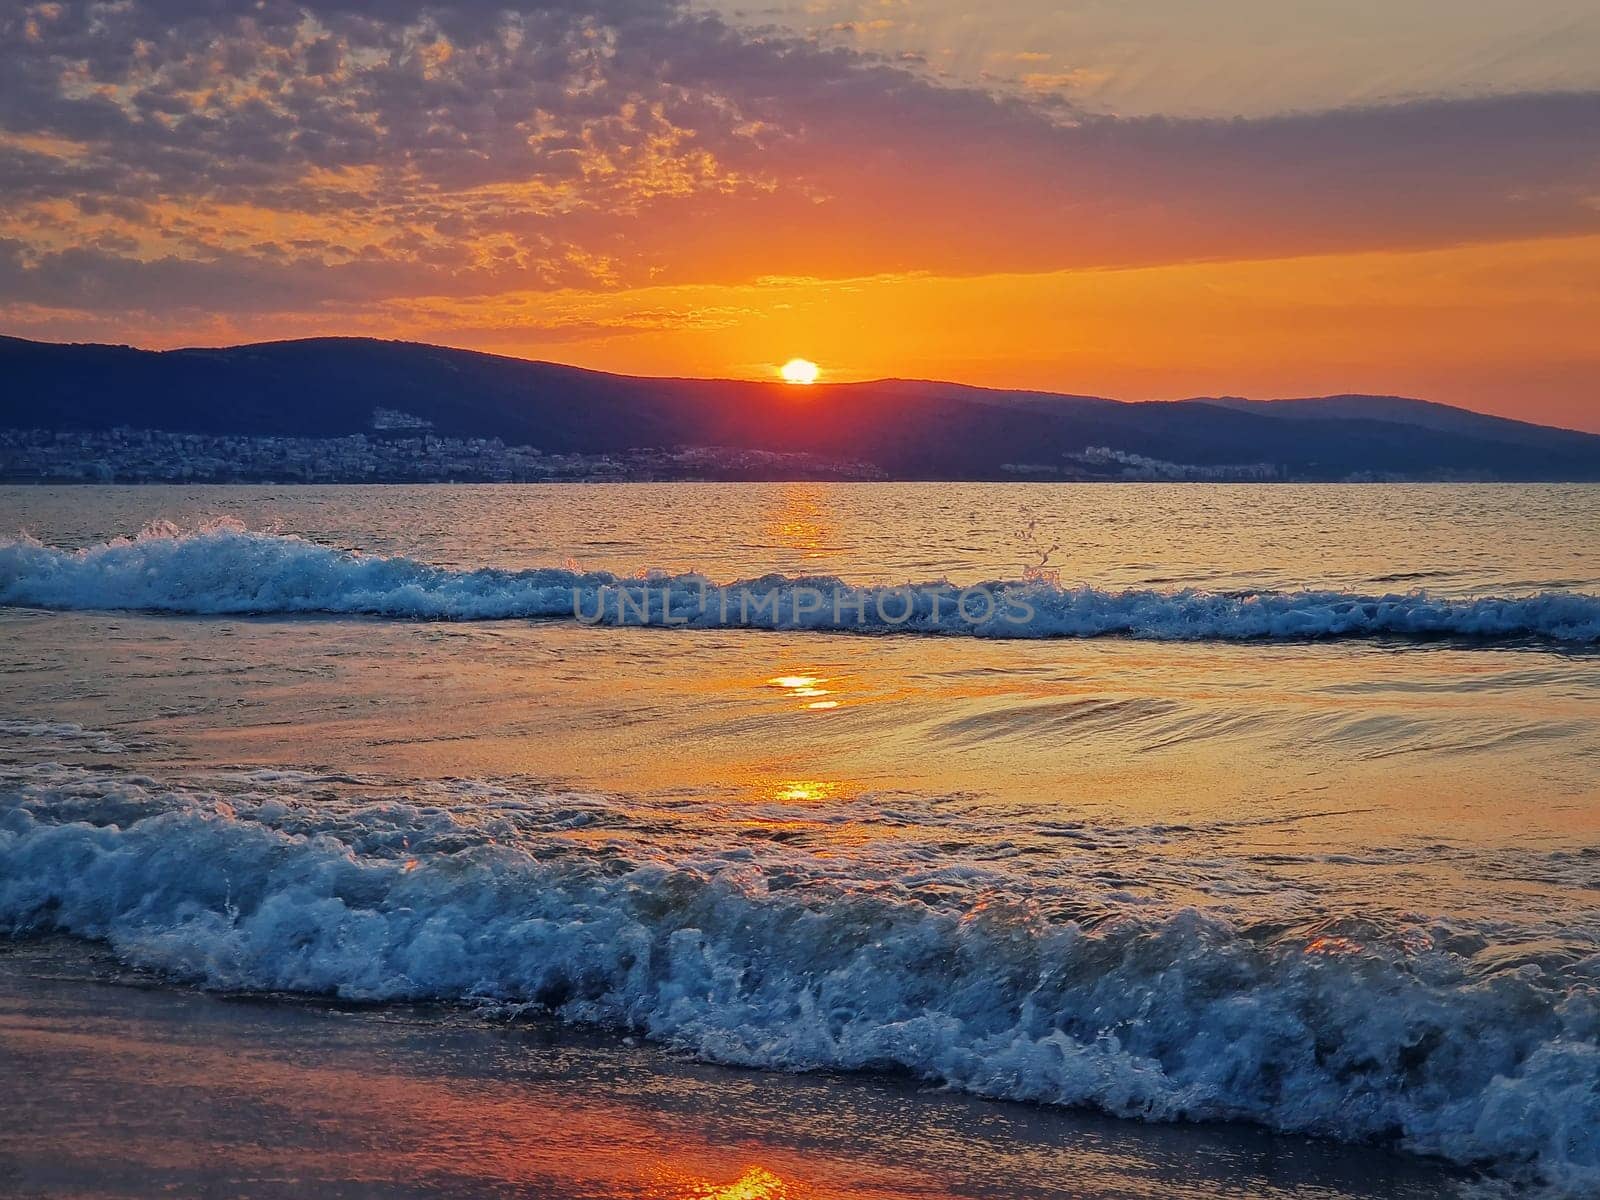 Beautiful sunrise at the Bulgarian coastline of Black Sea. Sunny beach resort, dawn scene with the sun rising up the hills on the horizon and foamy waves washing the sand shore. Summer vacation view by psychoshadow